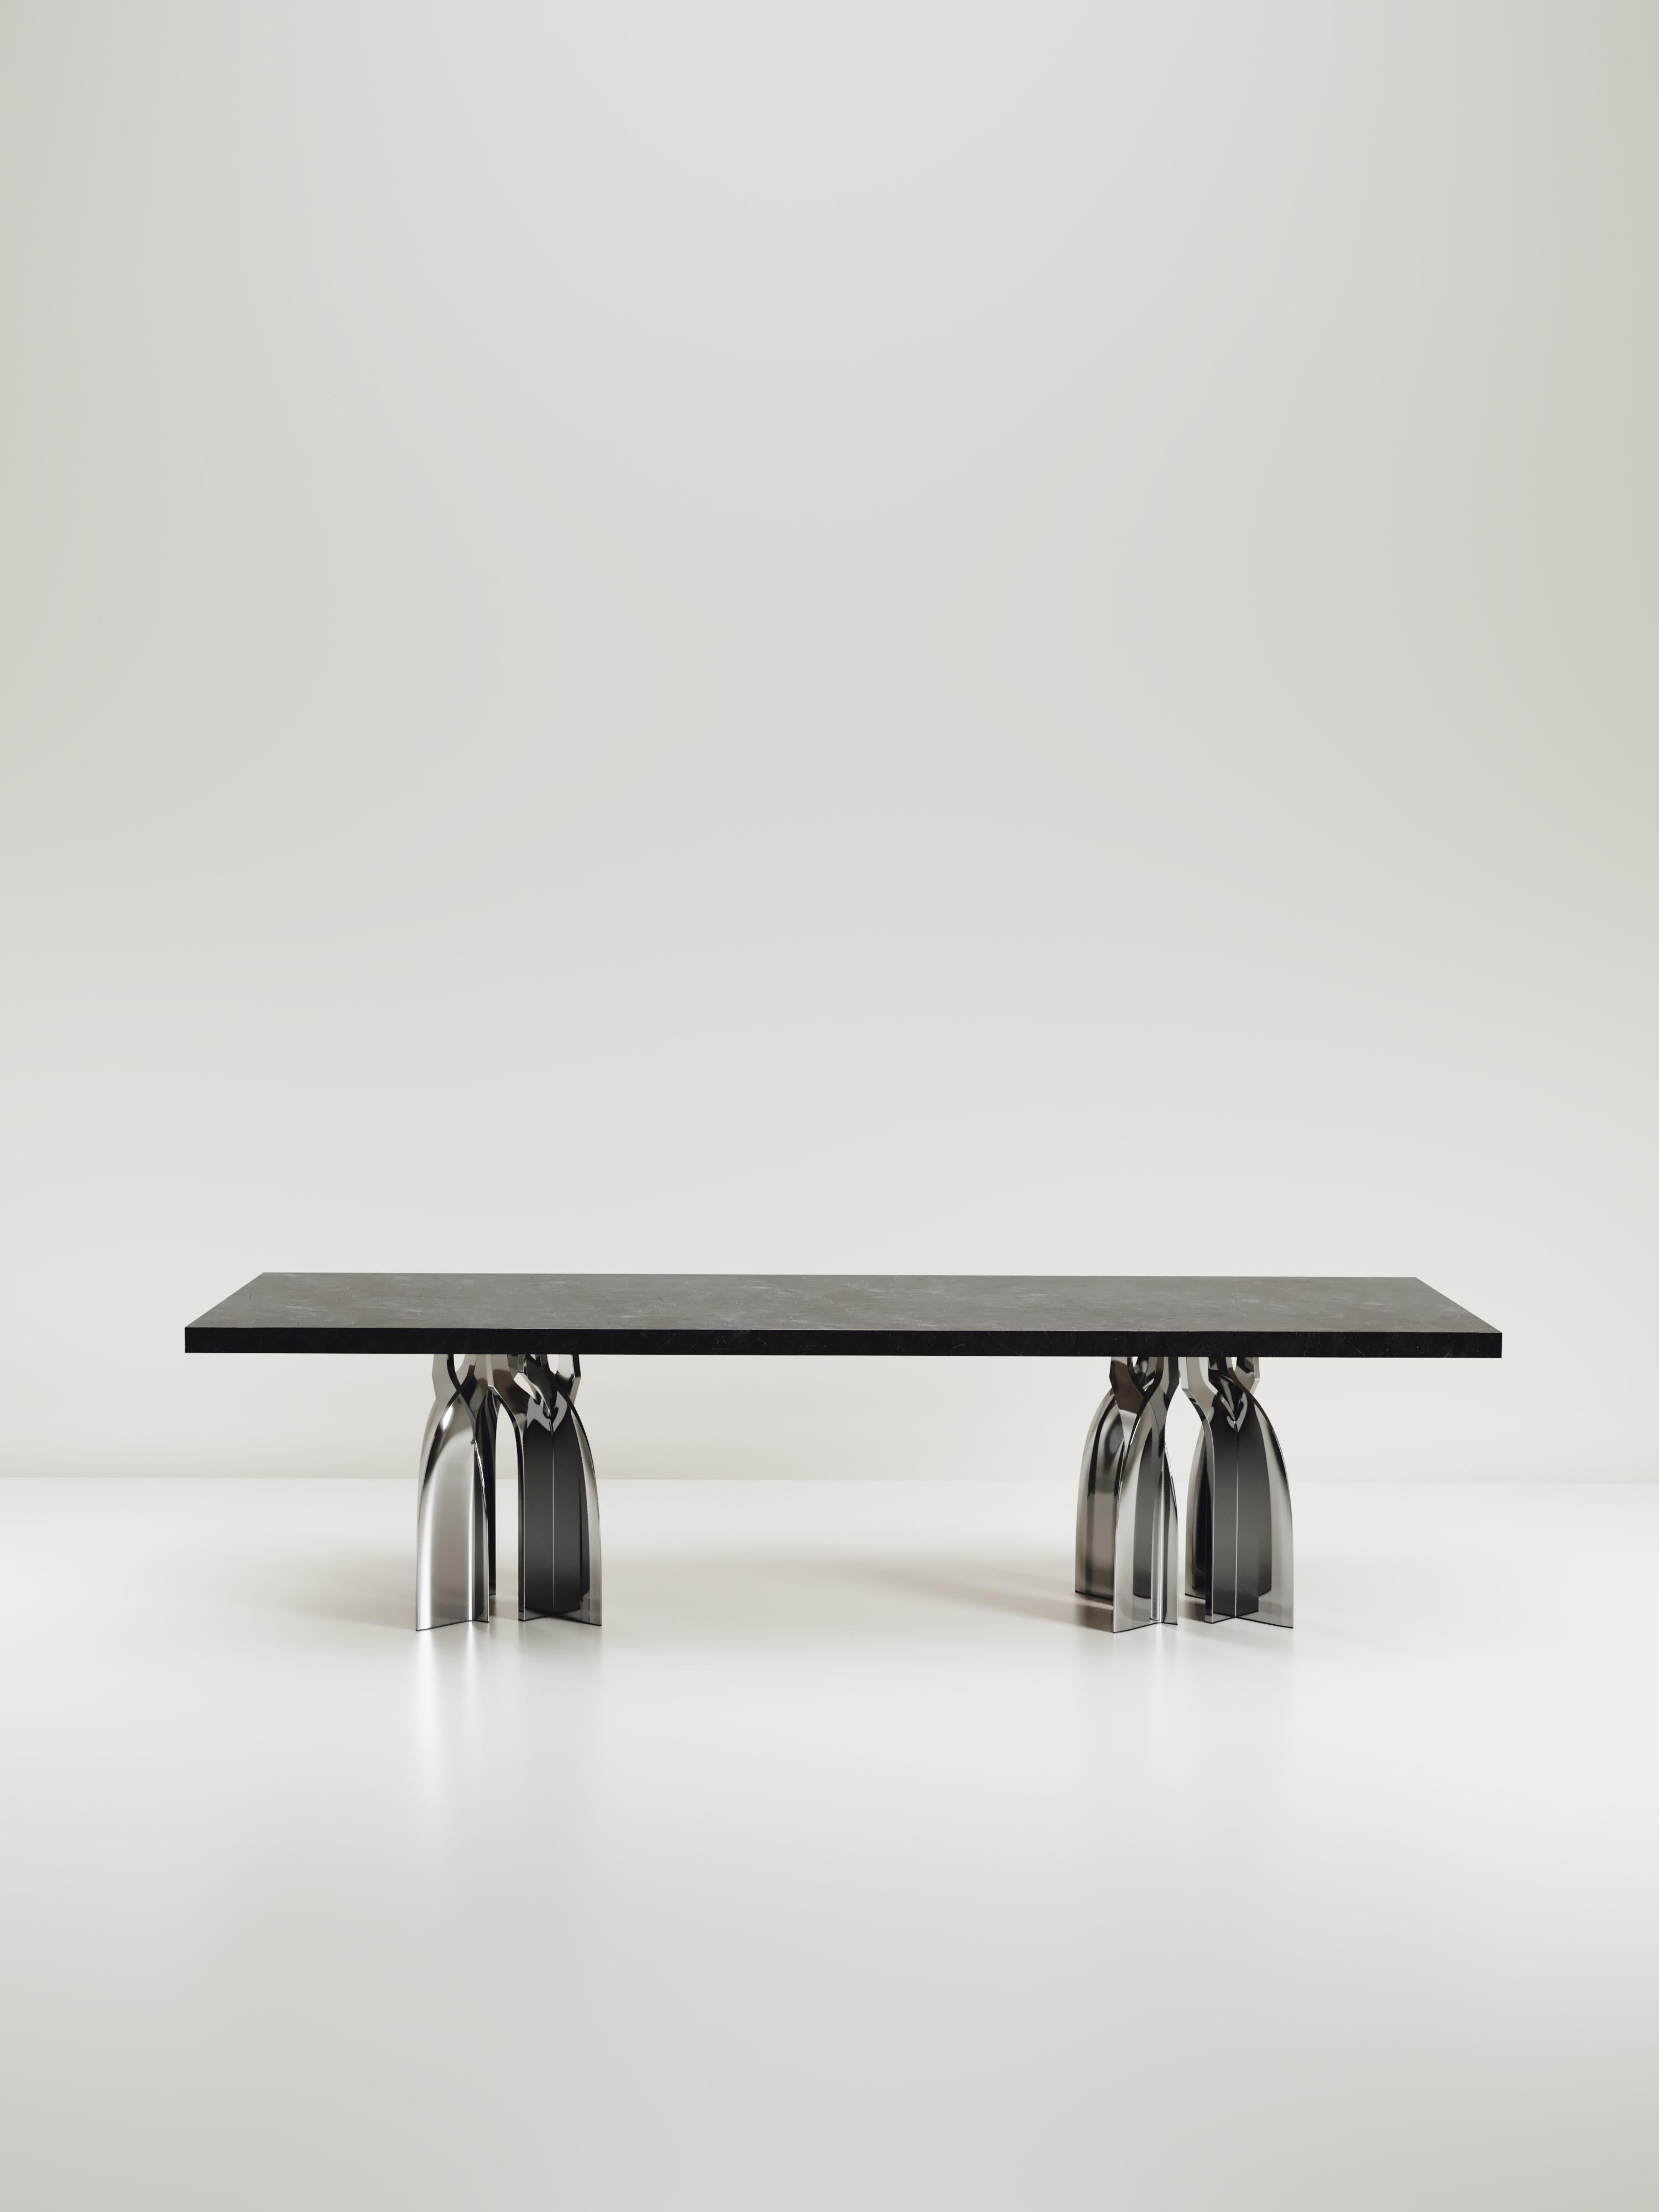 The Chital Dining table is a stunning piece, a statement in any space. The black pen shell inlaid top is sleek and dramatic, and followed by brushed stainless steel sculptural legs clustered together as the base. This piece is designed by Kifu